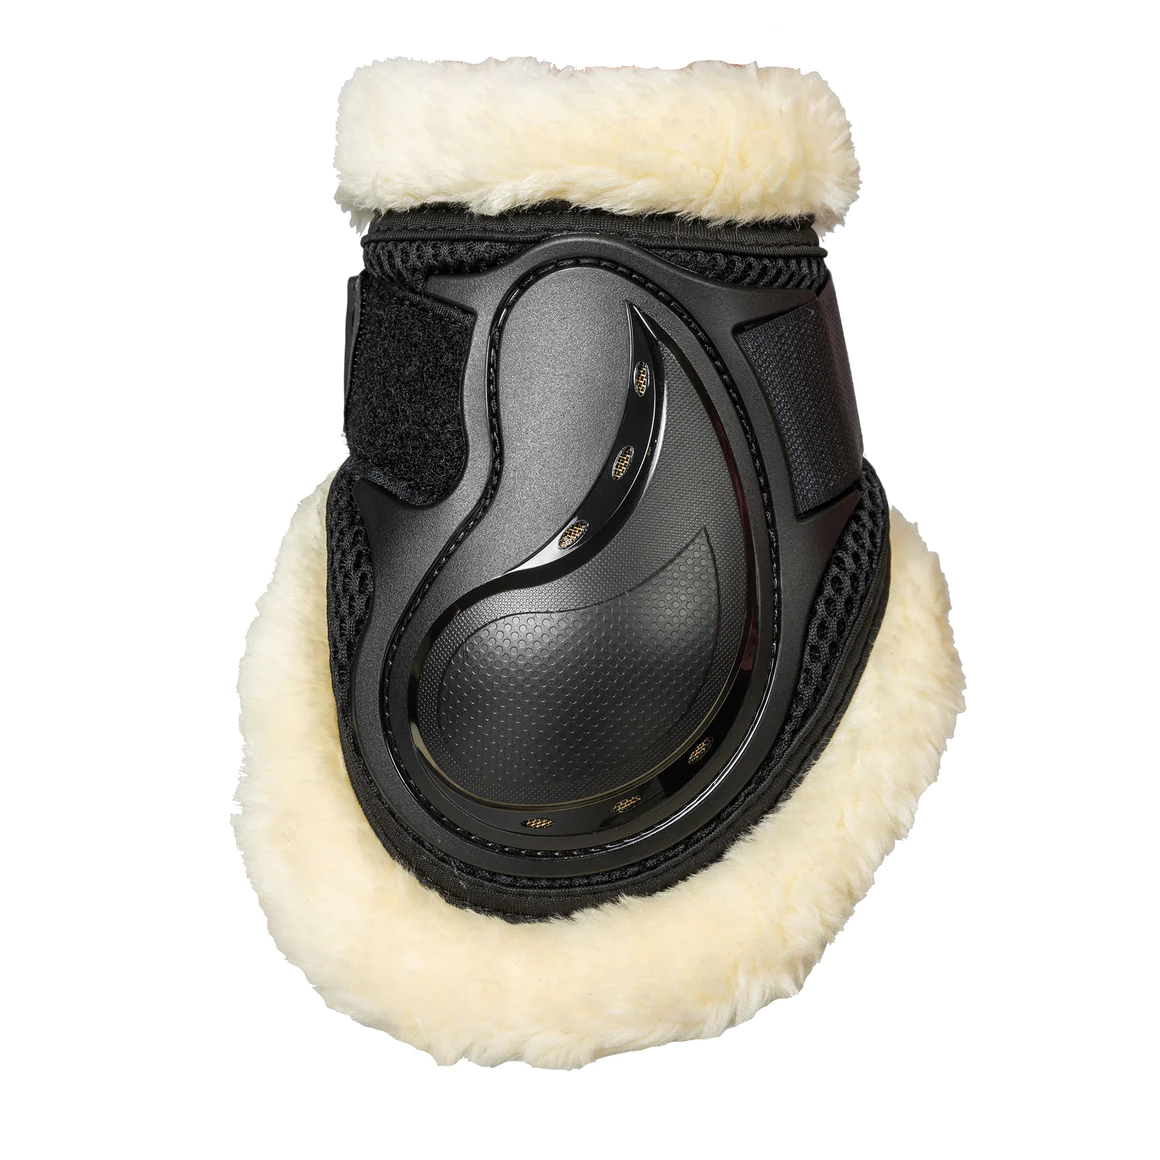 Back On Track BOT Airflow Fetlock Boot Hind w/Faux Fur